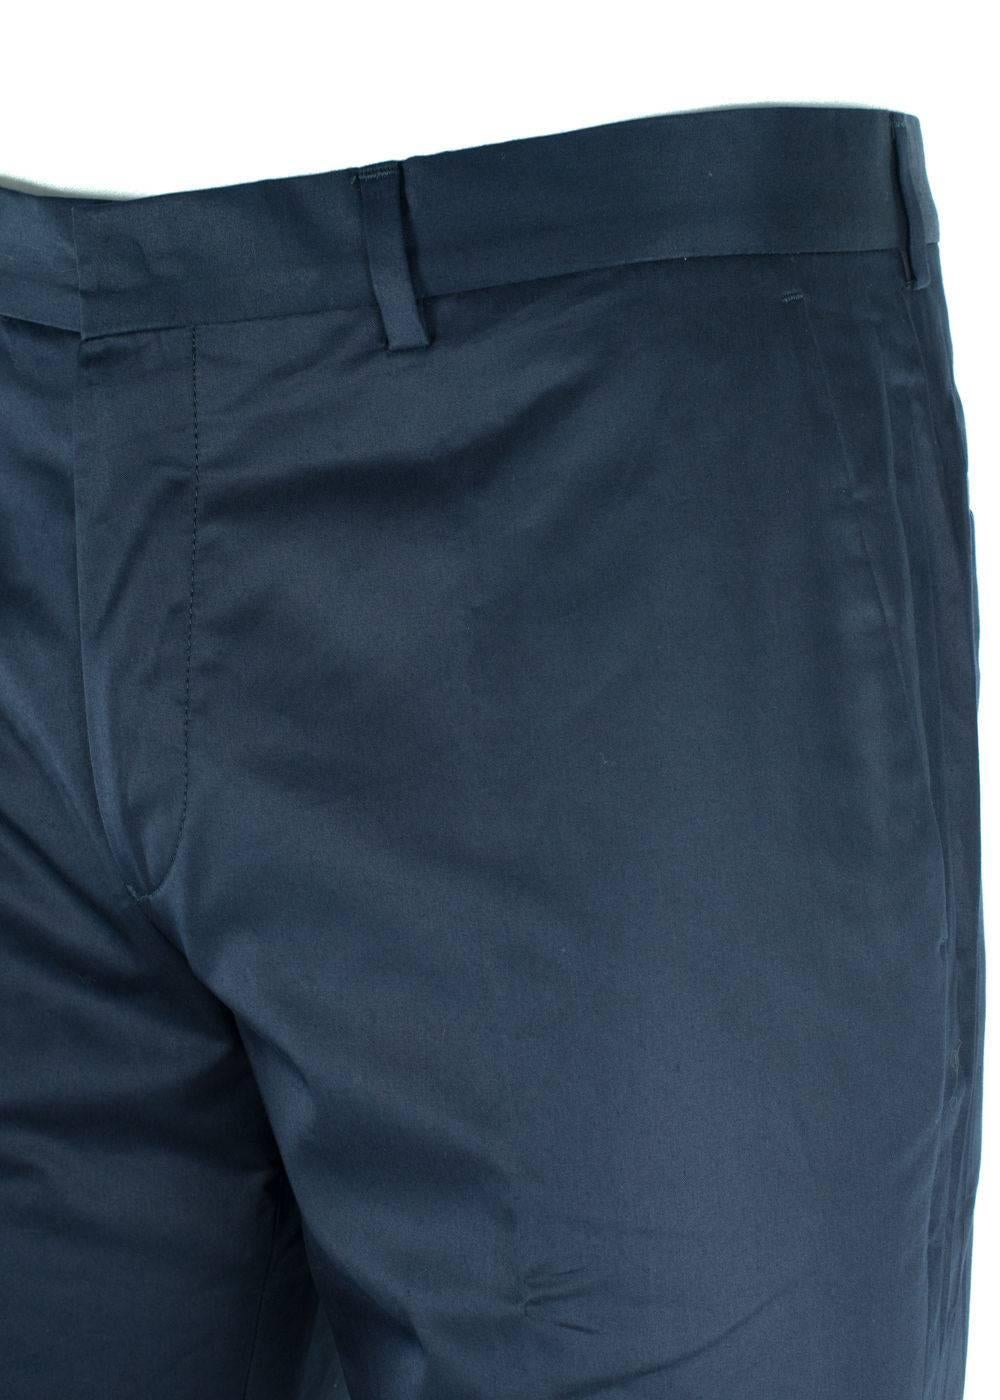 Brand New Givenchy Men's Trousers
Original Tag
Retails in Stores & Online for $390
Men's Size E52 / US36 Fits True to Size

Givenchy's take on a classic pair of navy trousers for those professional settings and important events. Made with 100%